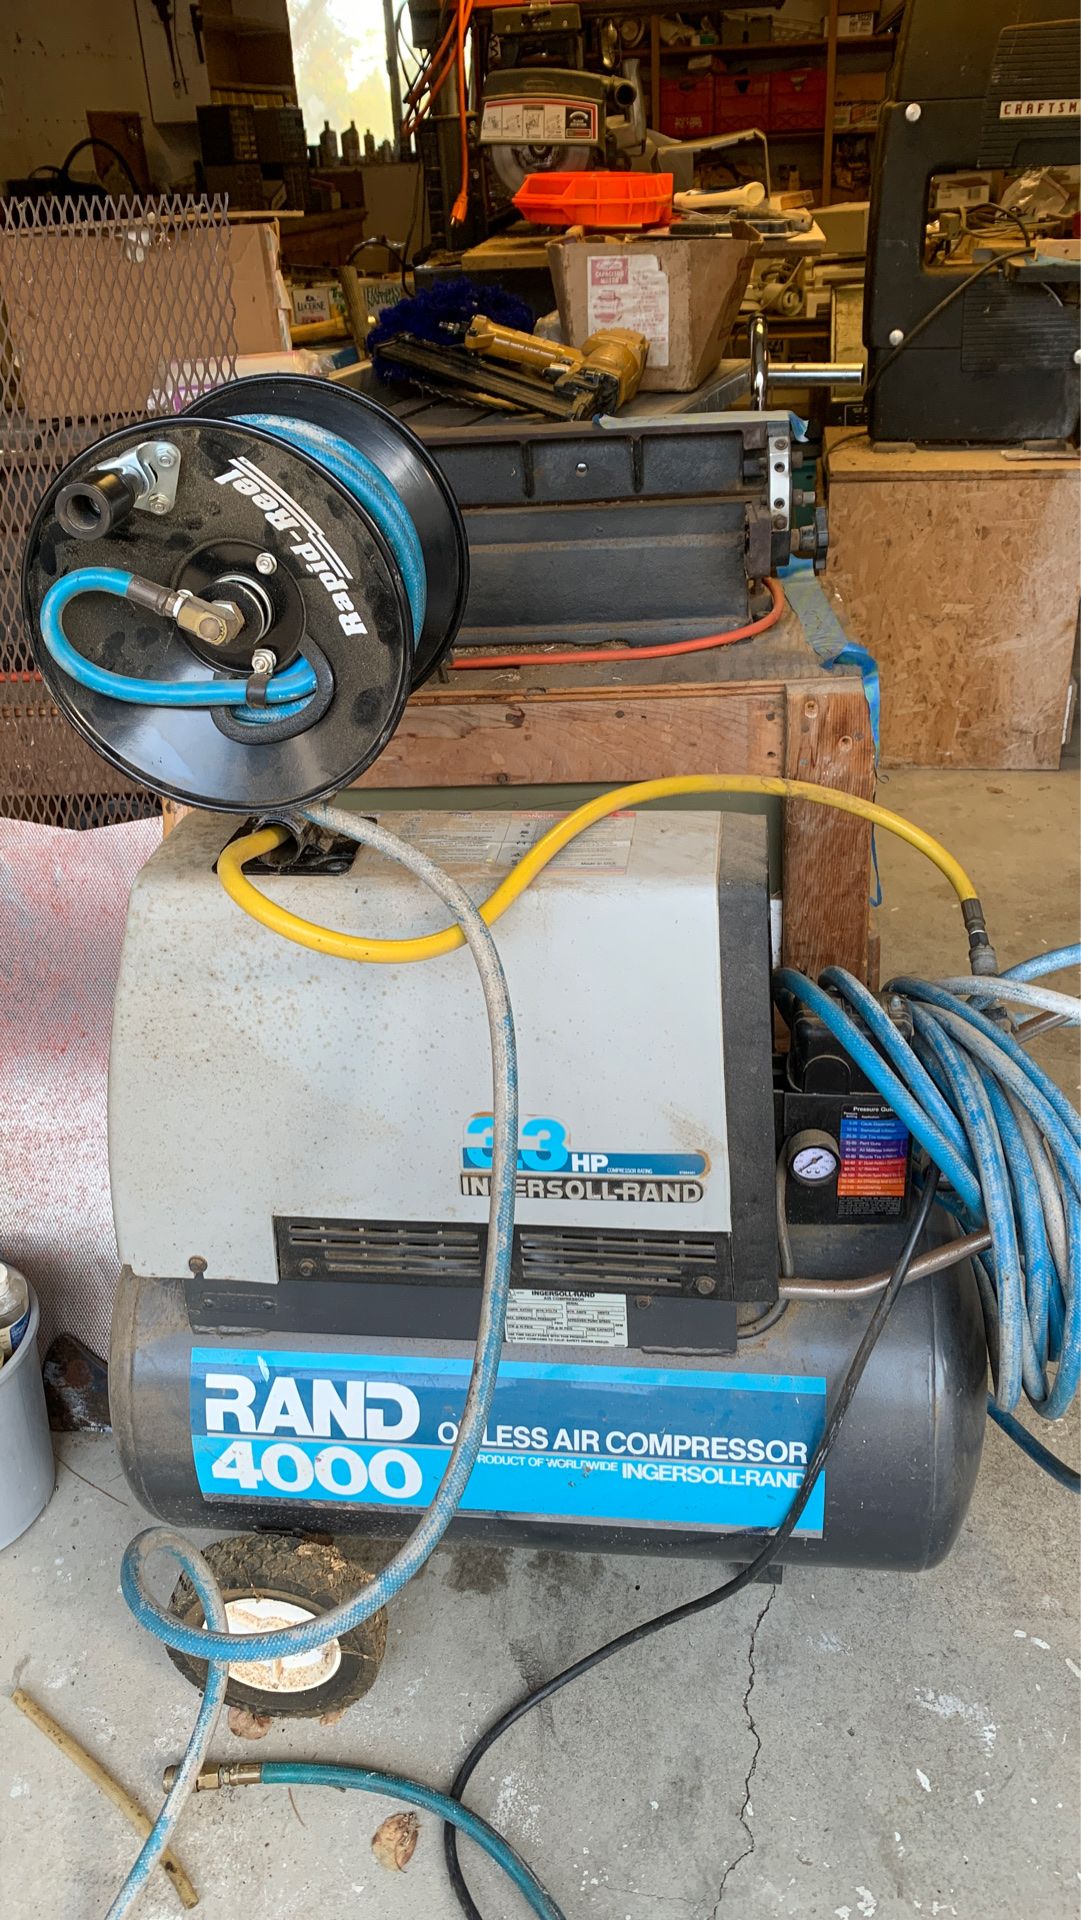 Air compressor with additional reel